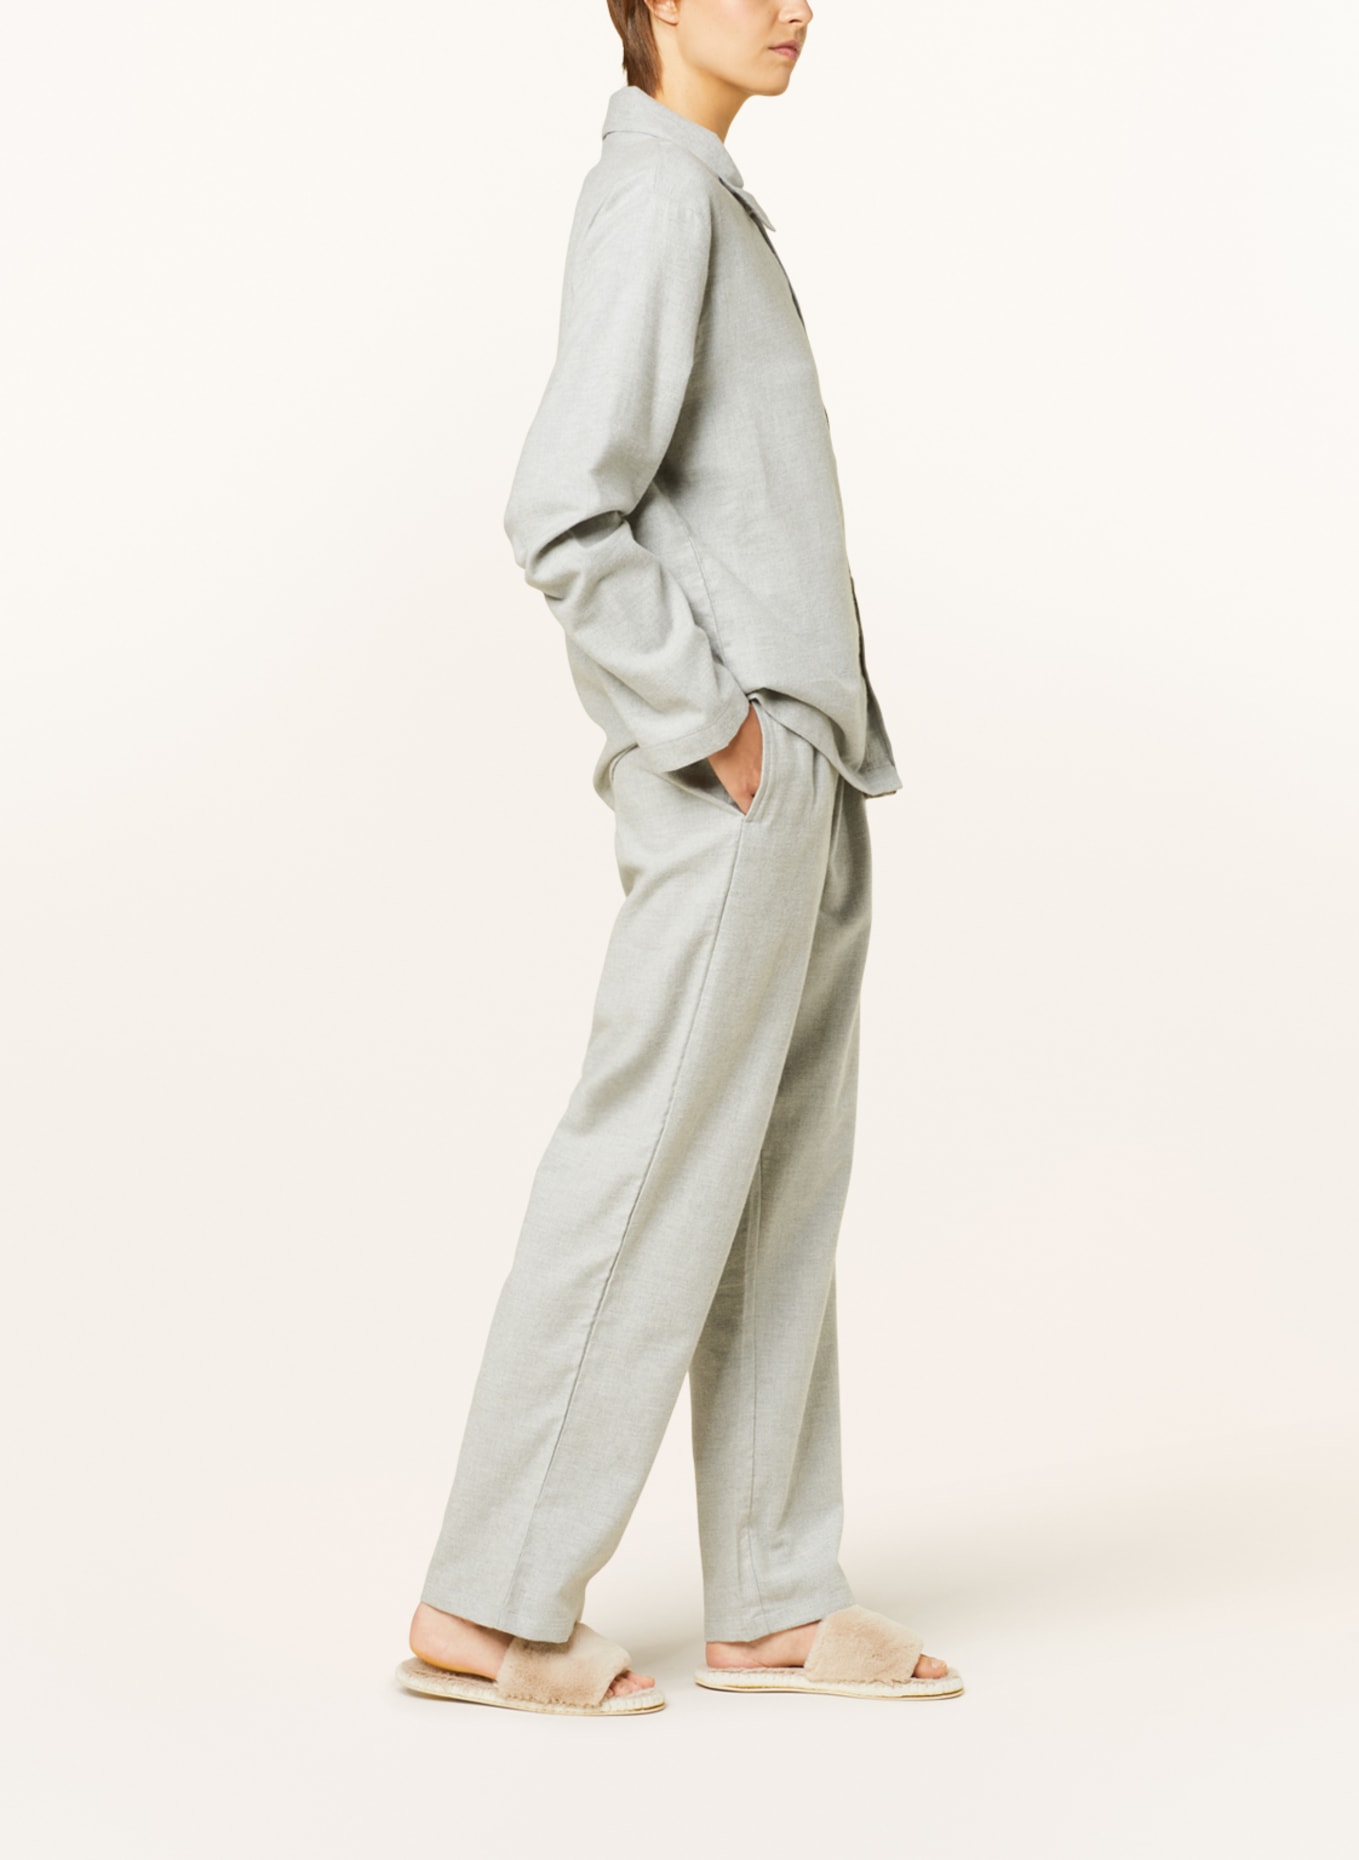 Calvin Klein Pajama pants PURE FLANELL in flannel, Color: GRAY (Image 4)